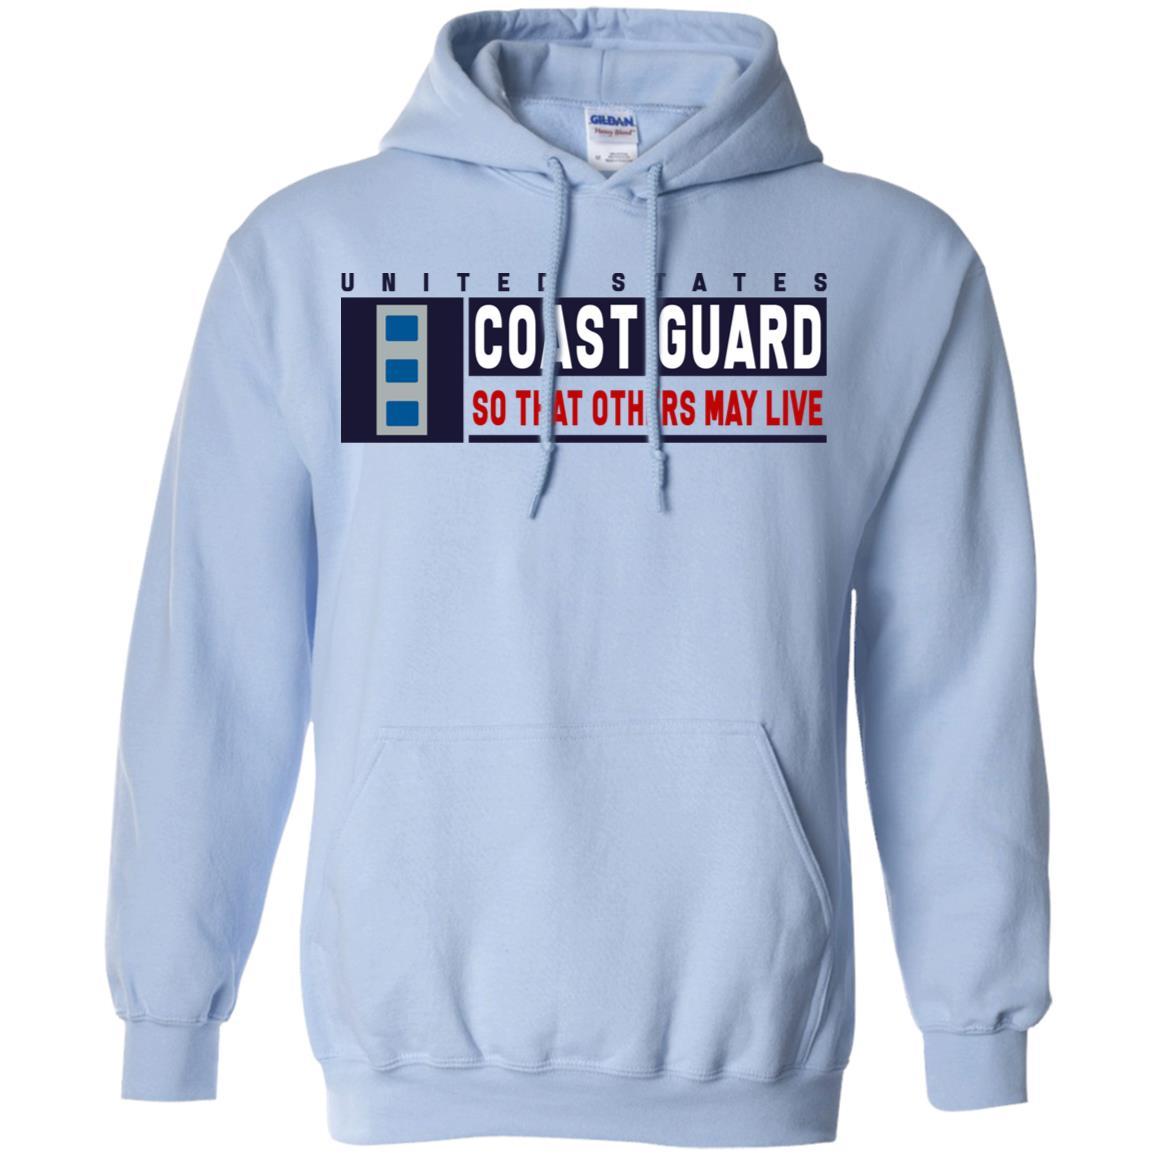 US Coast Guard W-4 Chief Warrant Officer So That Others May Live Long Sleeve - Pullover Hoodie-TShirt-USCG-Veterans Nation